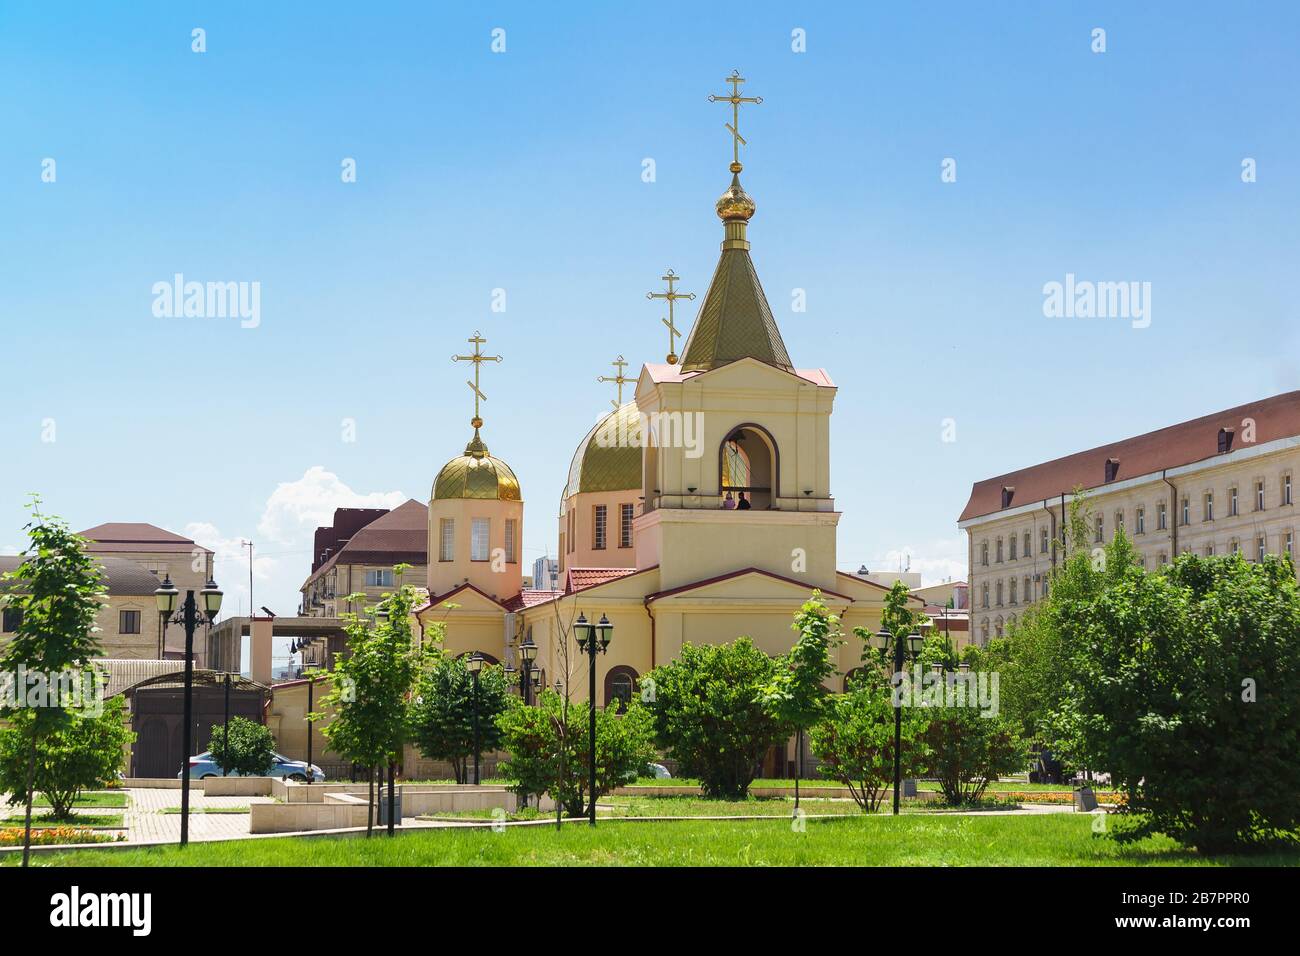 Domes of the Church of Archangel Michael on the Avenue named after Akhmat Kadyrov in Grozny. Christianity in a Muslim country Stock Photo